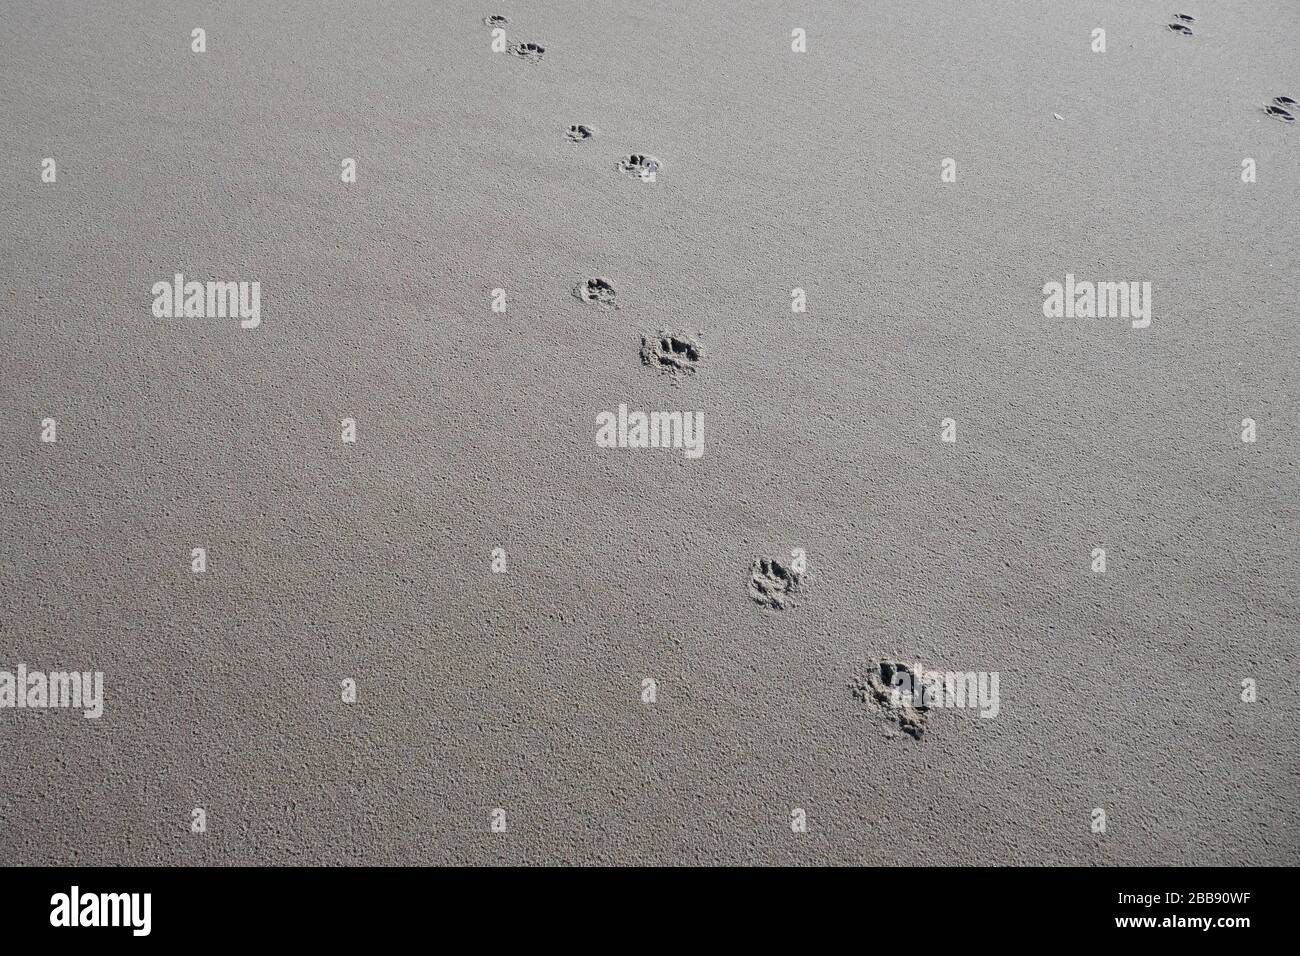 footsteps at newly formed dunes at zandmotor project in Kijkduin, Den Haag Stock Photo